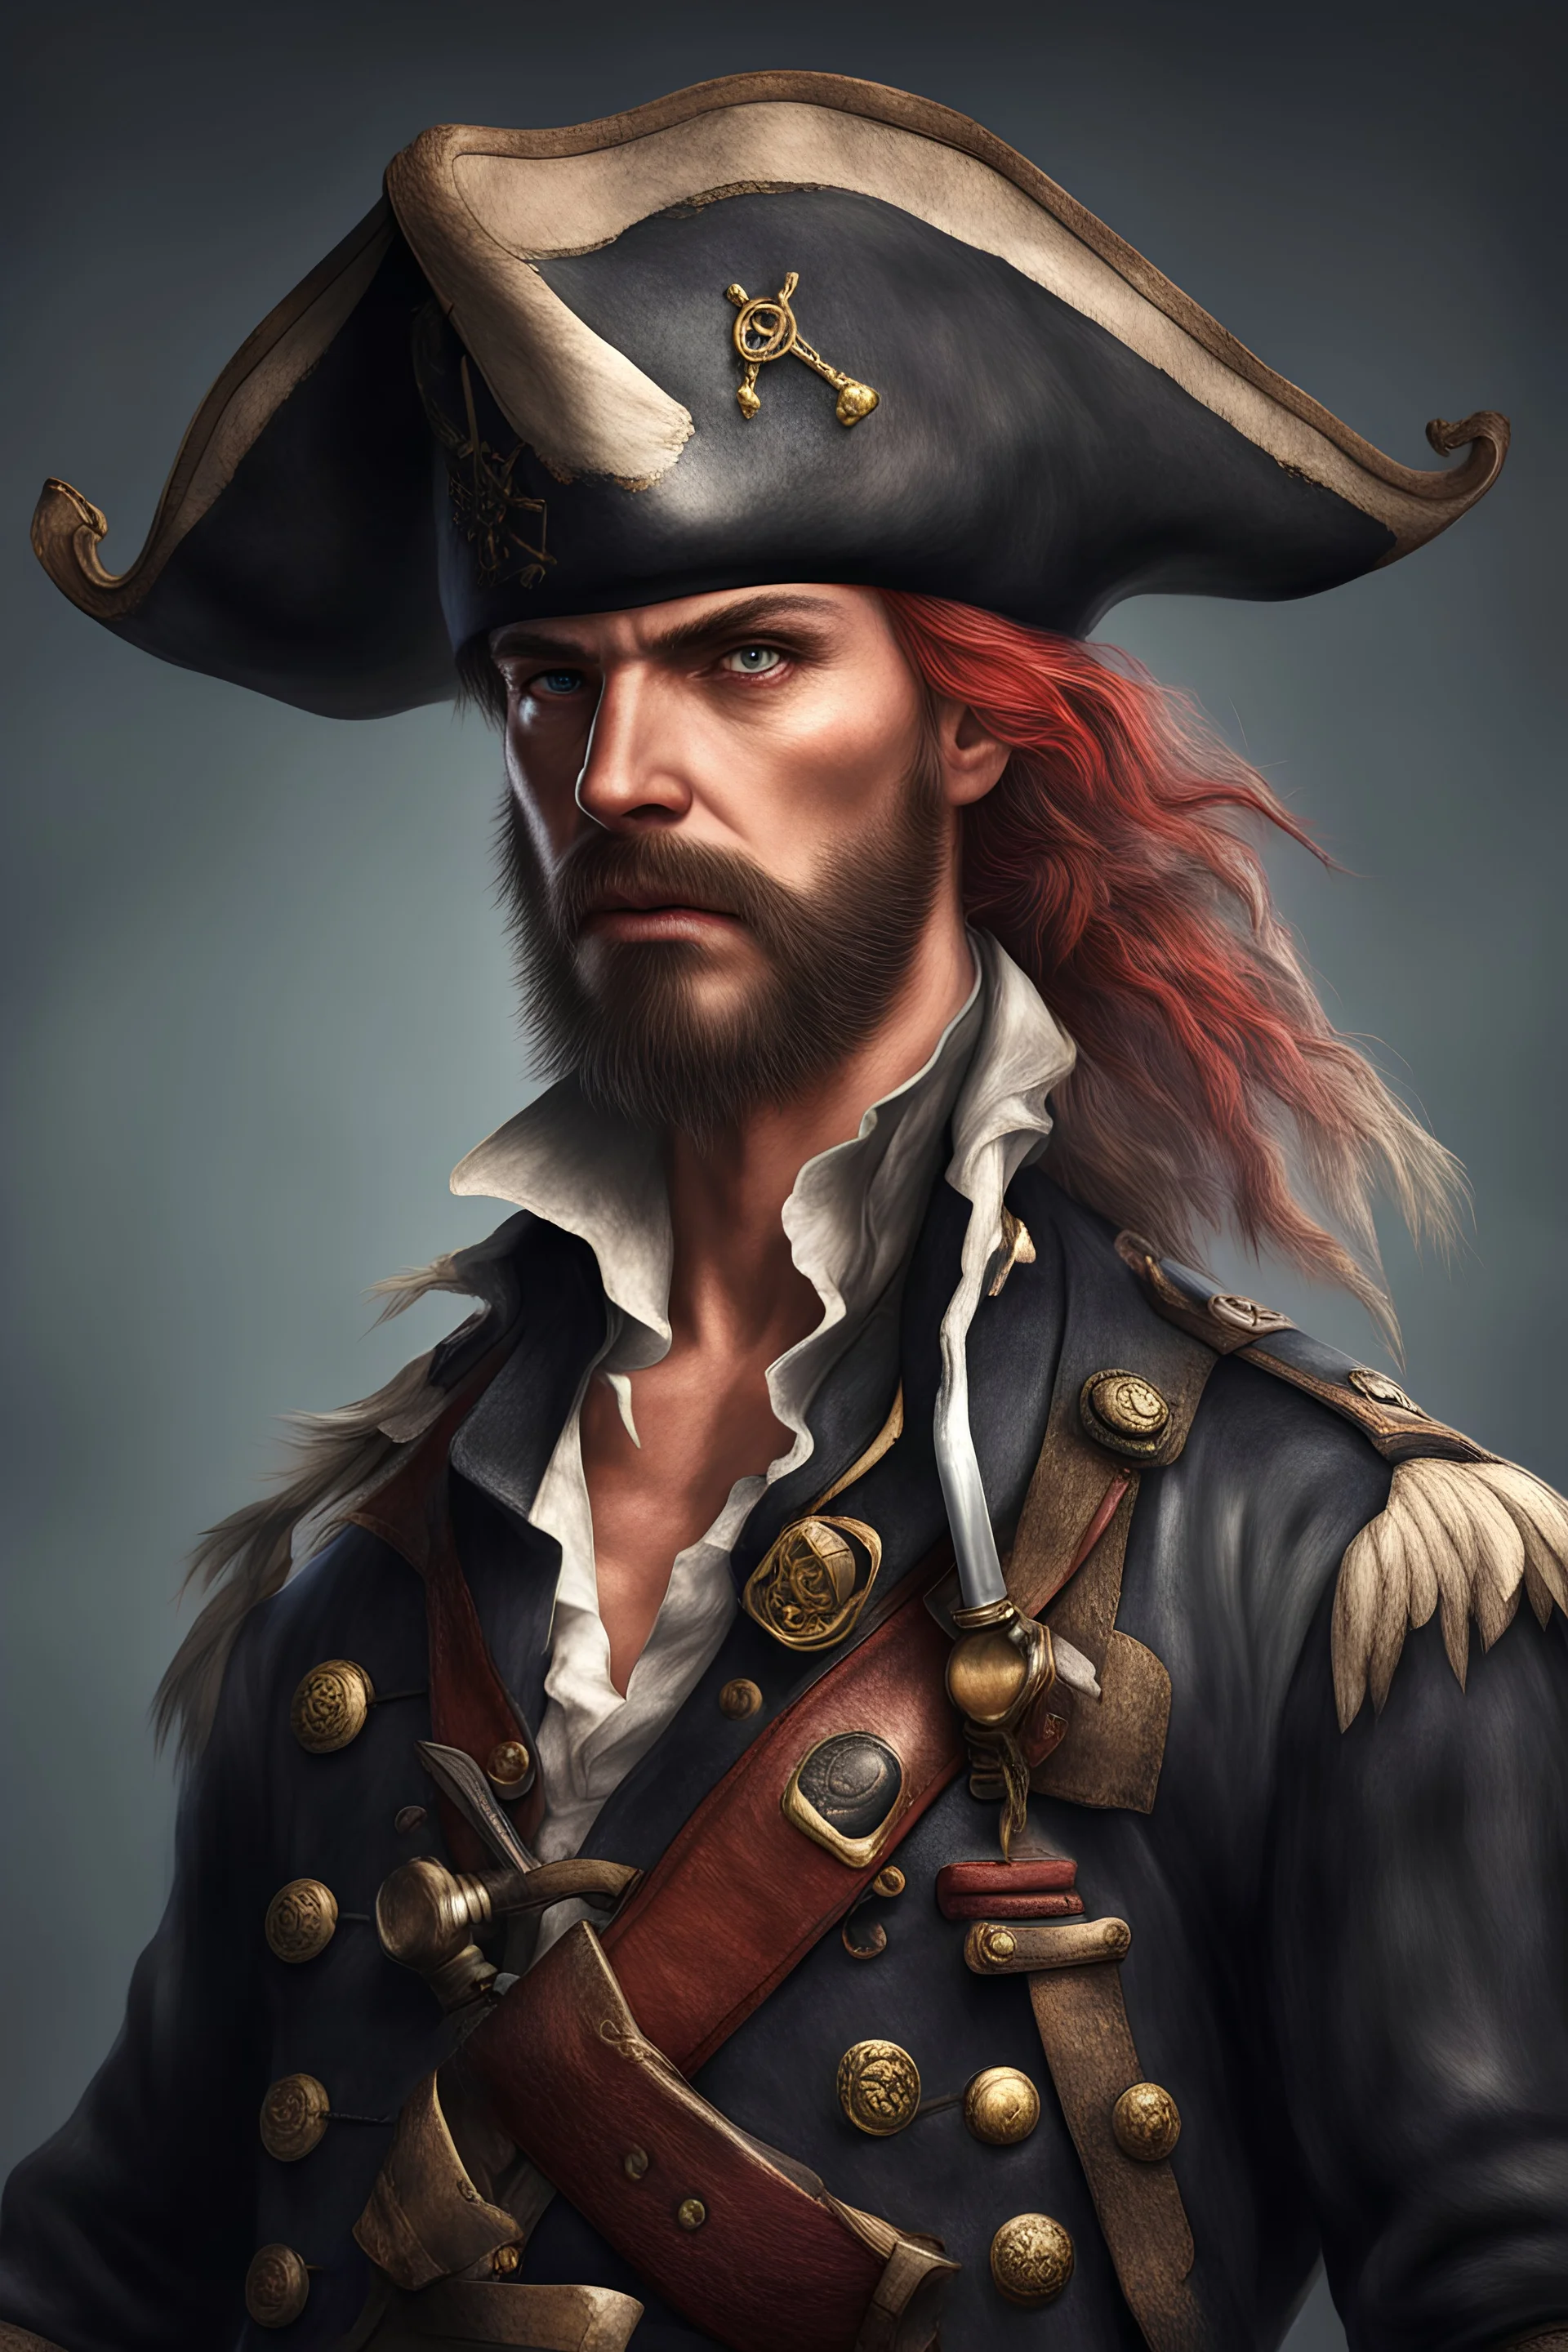 pirate in his uniform, pirate atmosphere, ultra realistic